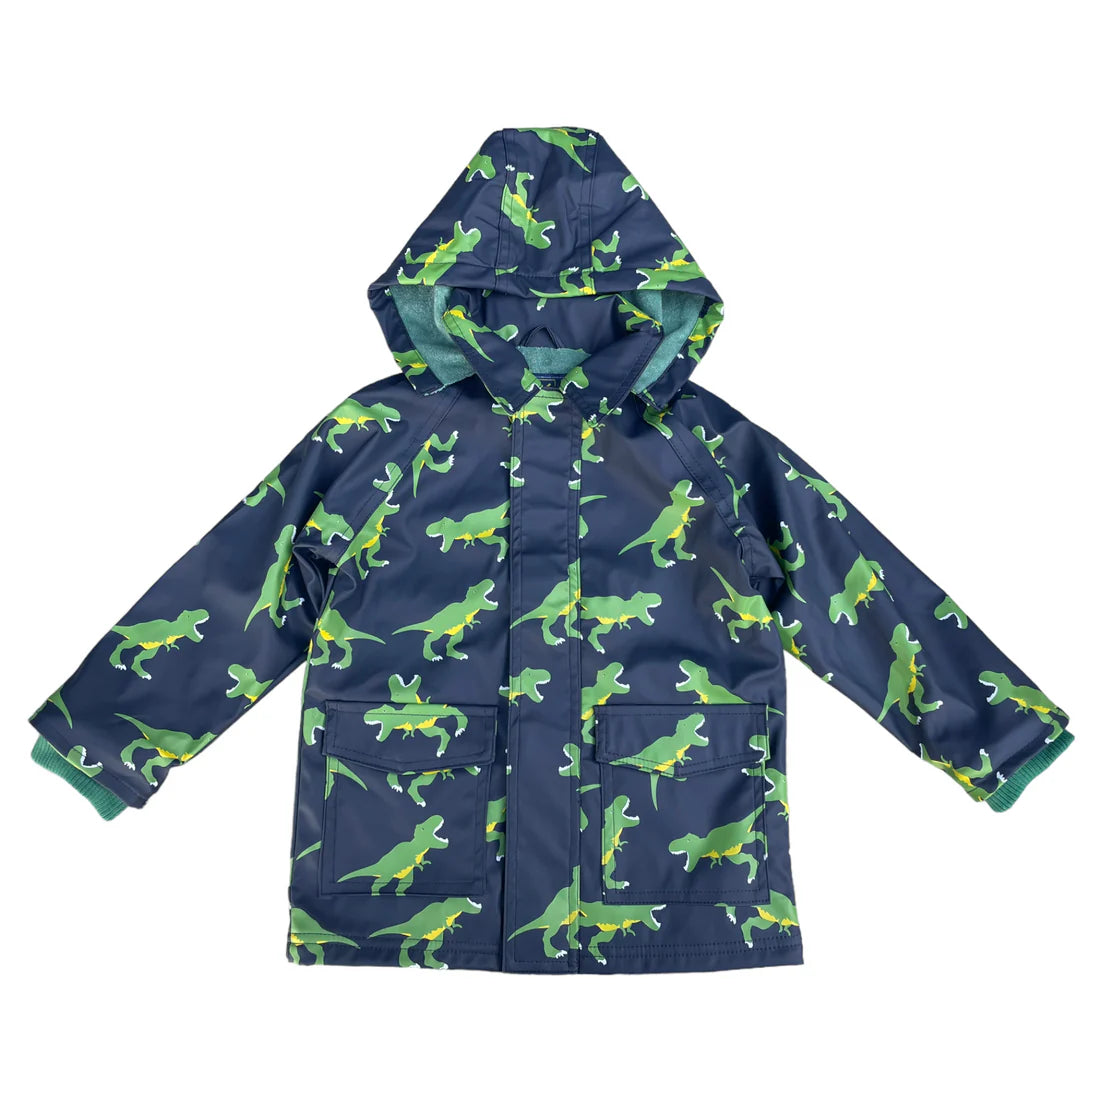 T-Rex Terry Towelling Lined Raincoat - Peacoat